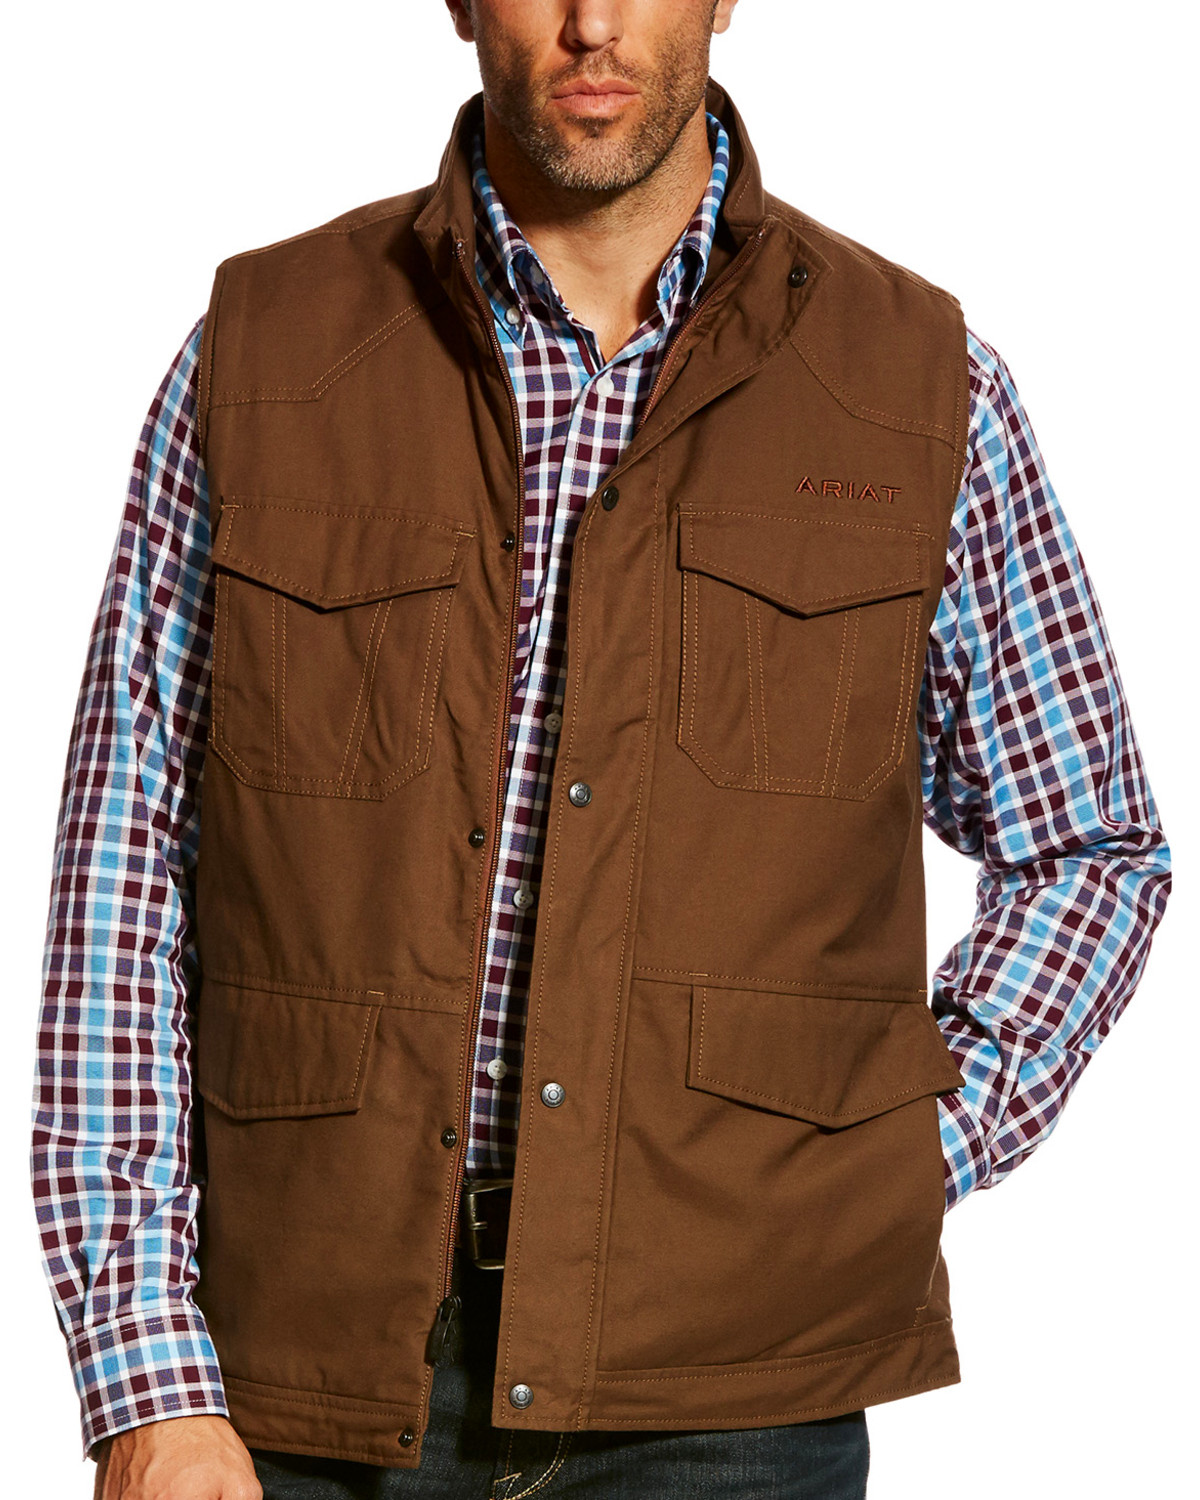 Cinch Mens Canvas Vest with Concealed Carry Pockets 